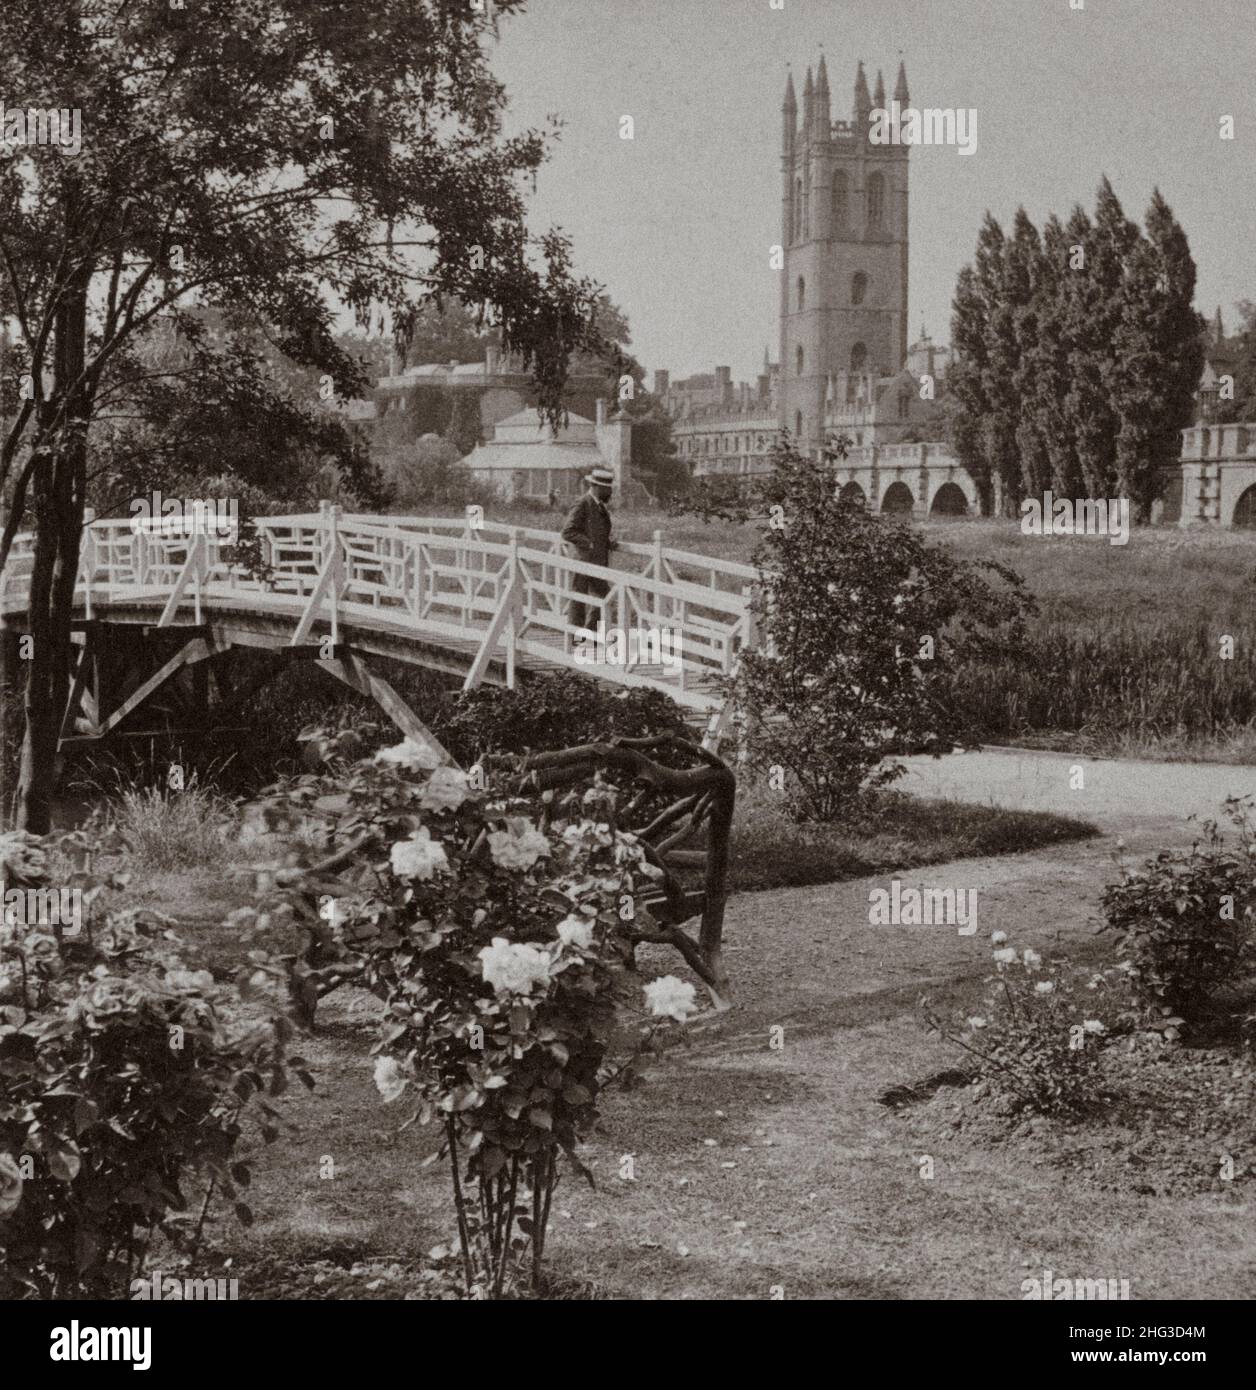 Vintage photo of Oxford University, Britain's most famous seat of learning - showing Mary Magdalen College, Oxford, England. 1902 Stock Photo